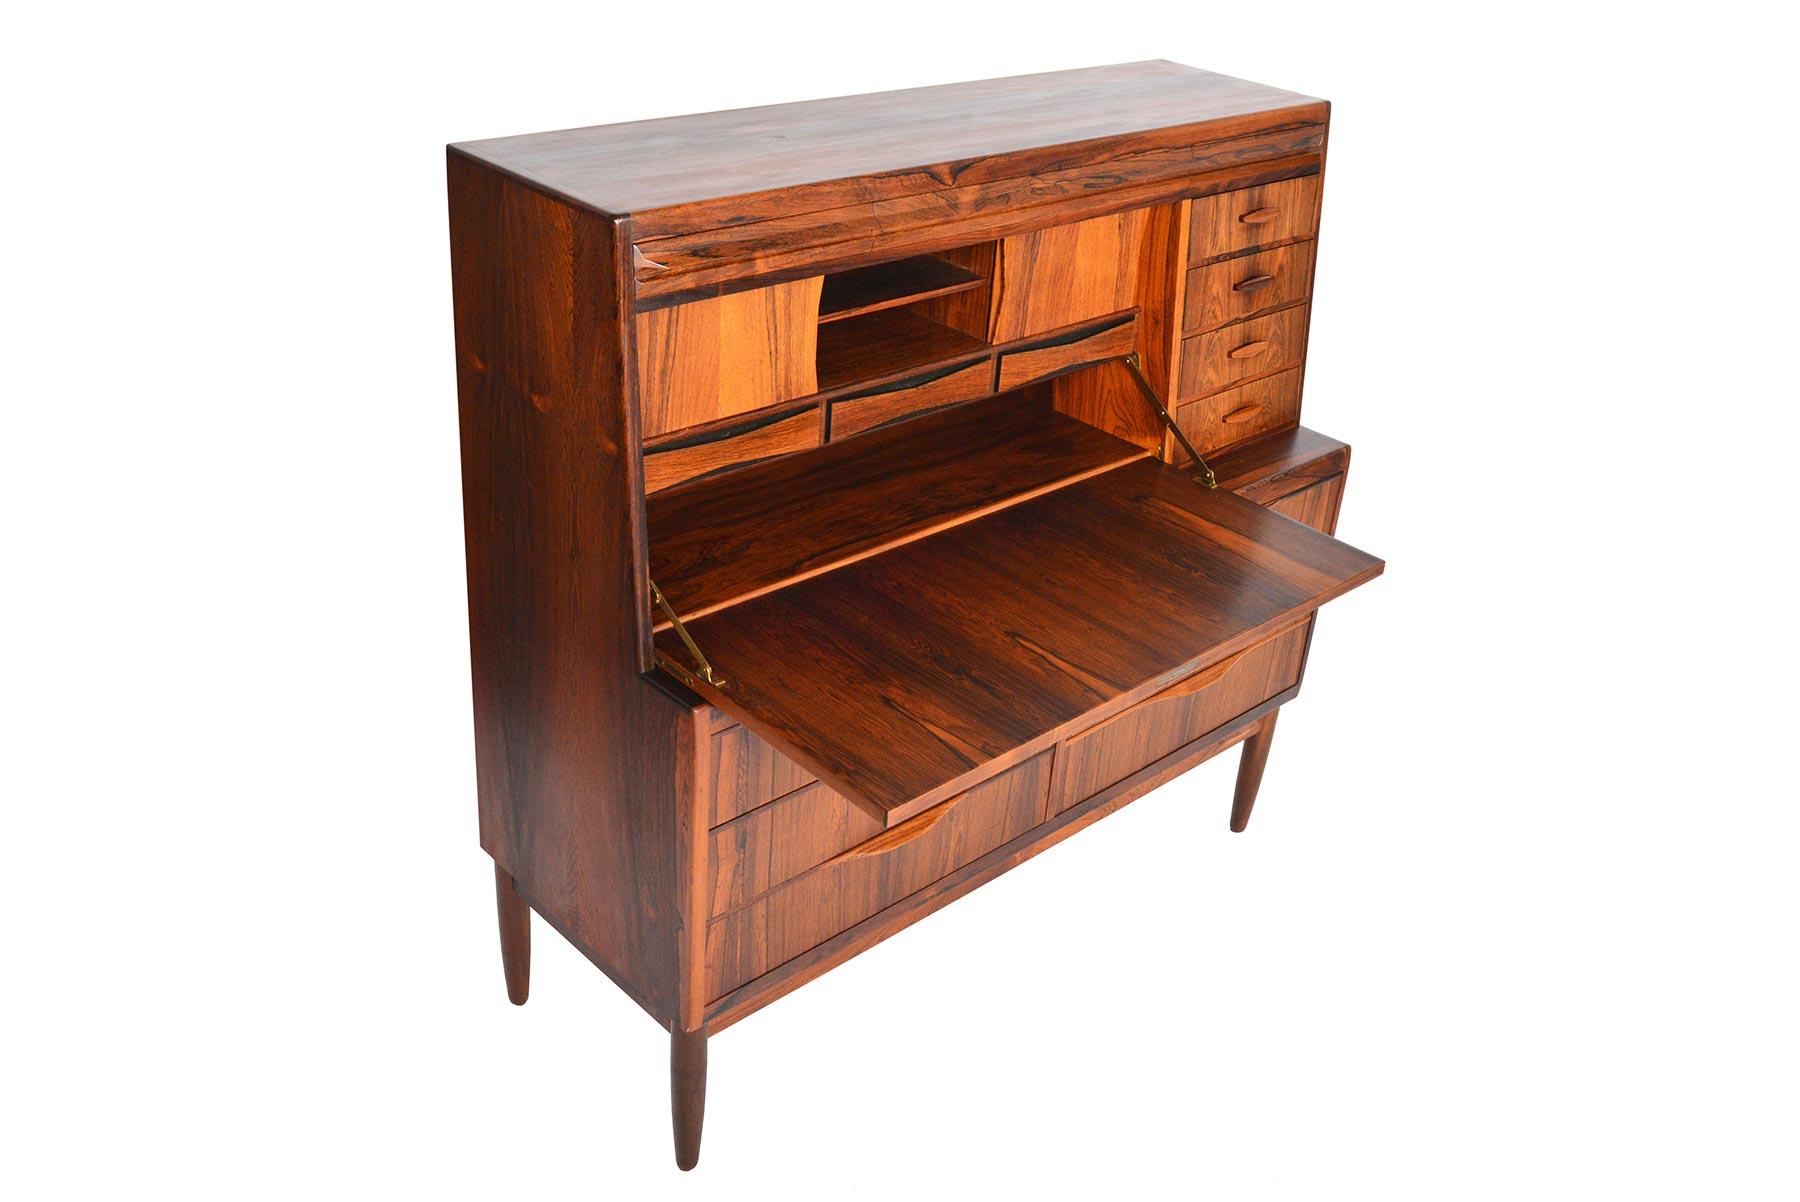 Designed by Erling Torvits for Klim Møbelfabrik in the 1960s, this rare and incredible Danish modern secretary desk is crafted from Brazilian rosewood. Top desk surface folds down to reveal three bow tie drawers, which sit below two sliding door